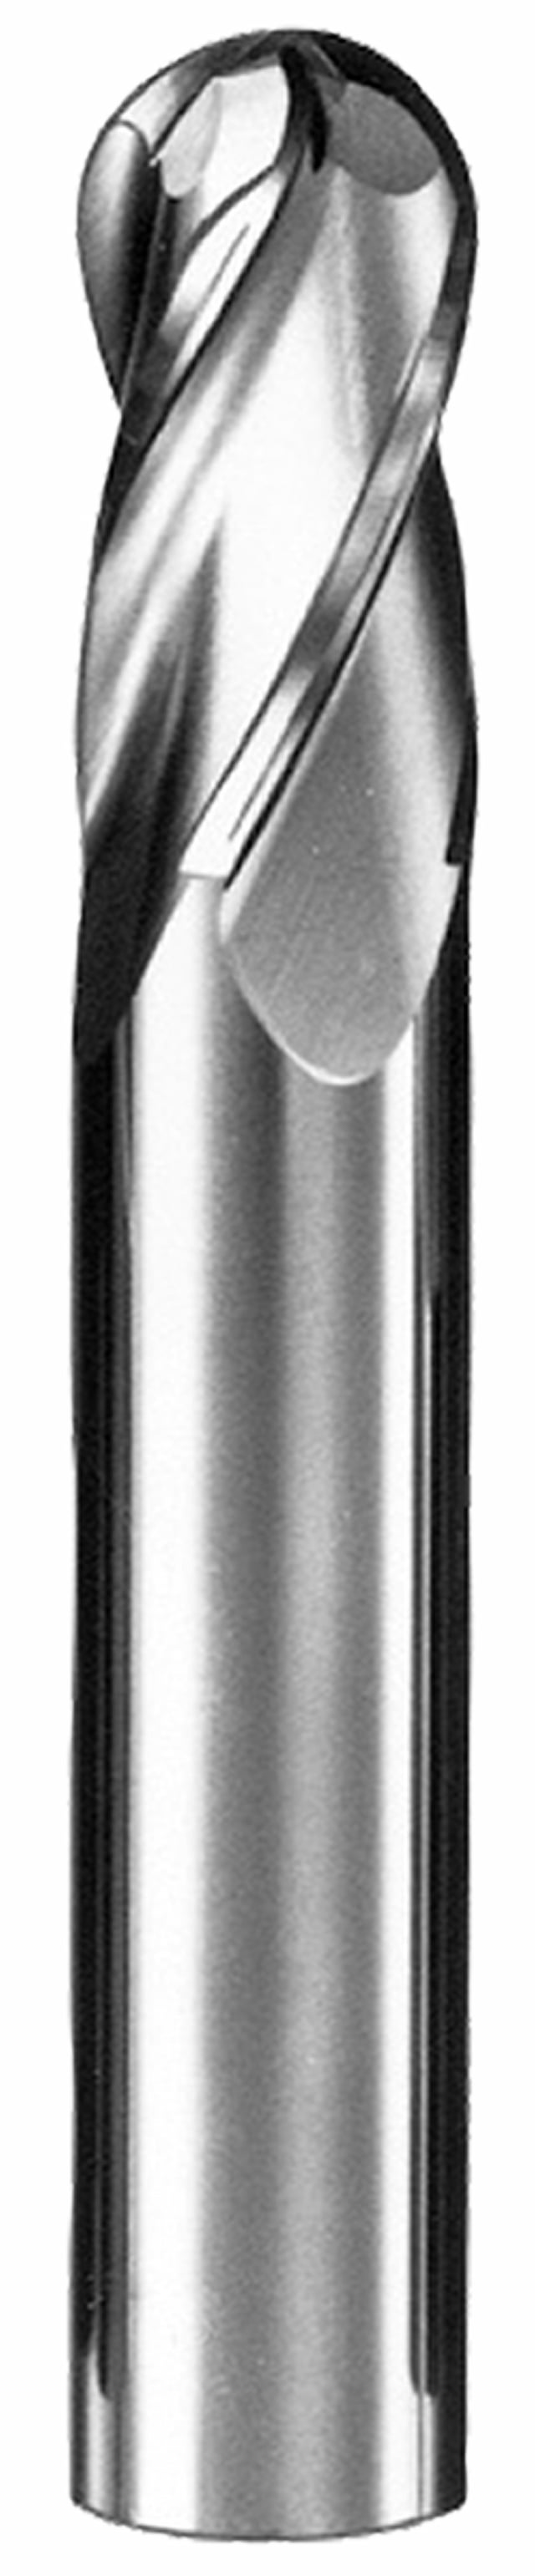 1.00mm Dia, 4 Flute, Ball Nose End Mill - 40106